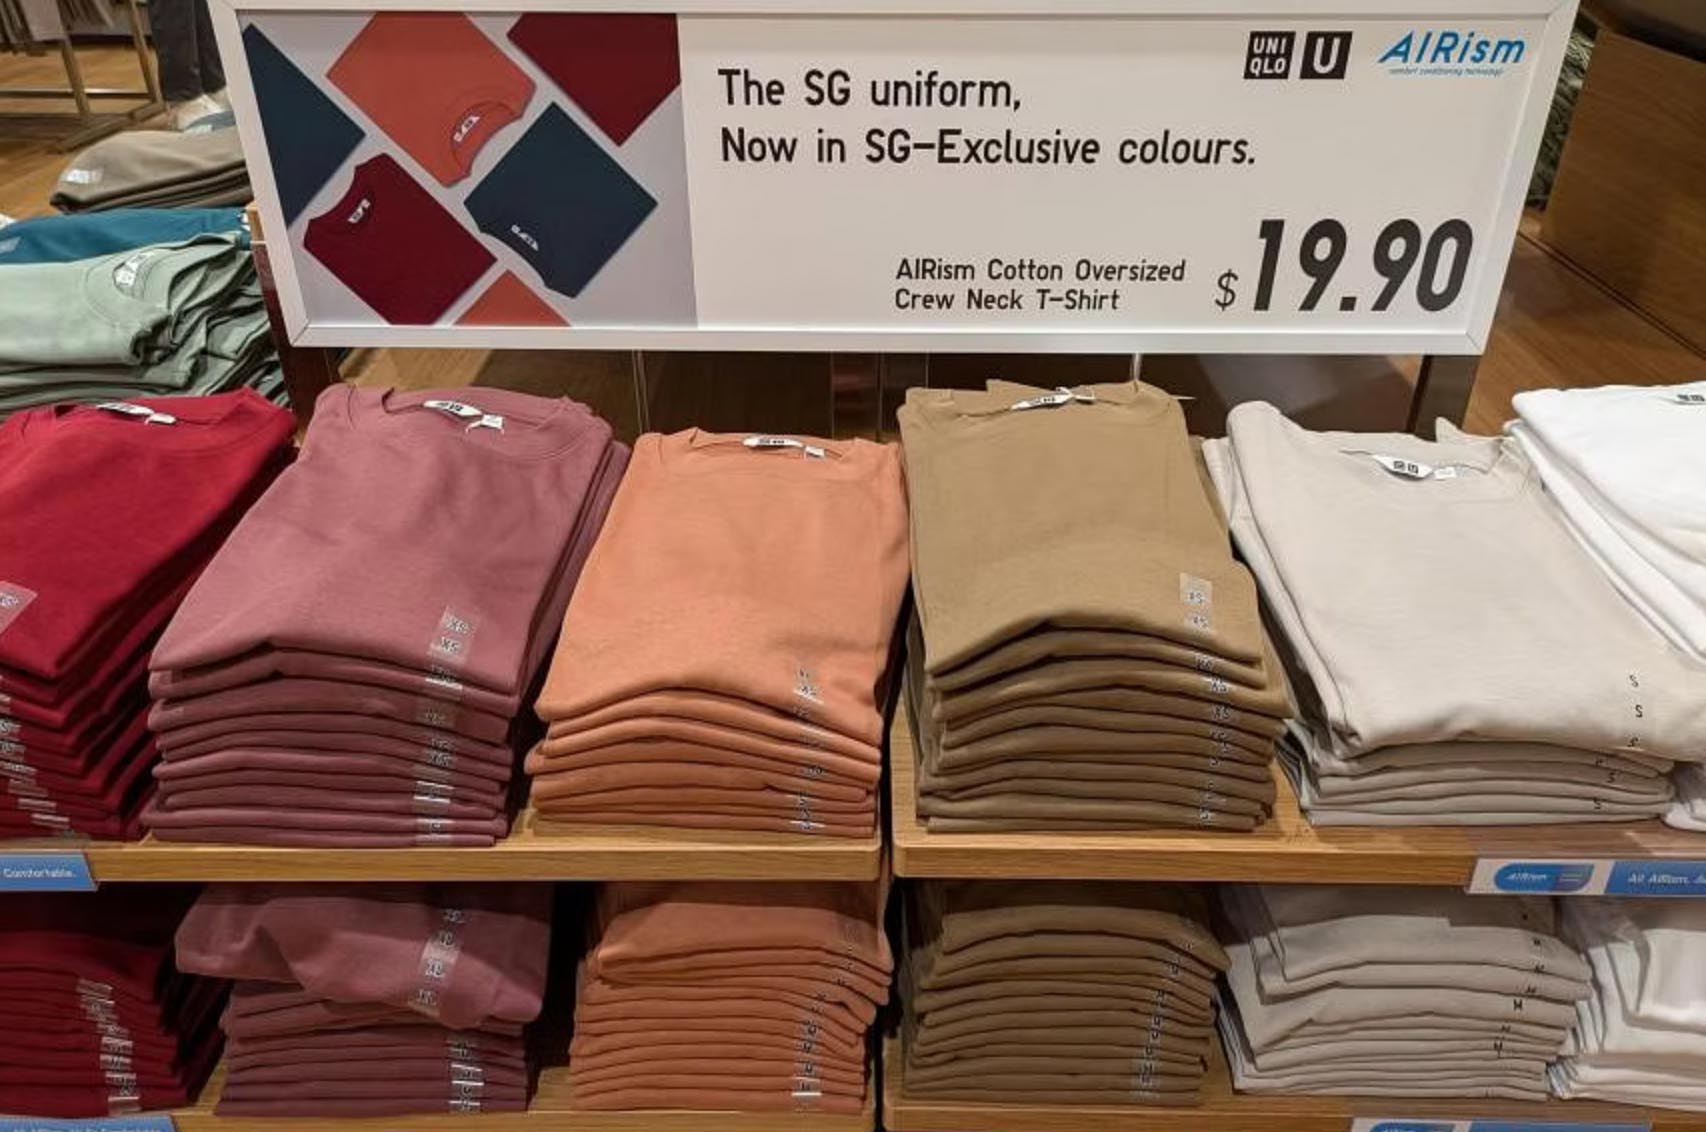 Uniqlo doubles down on efforts to become Singapore's national uniform